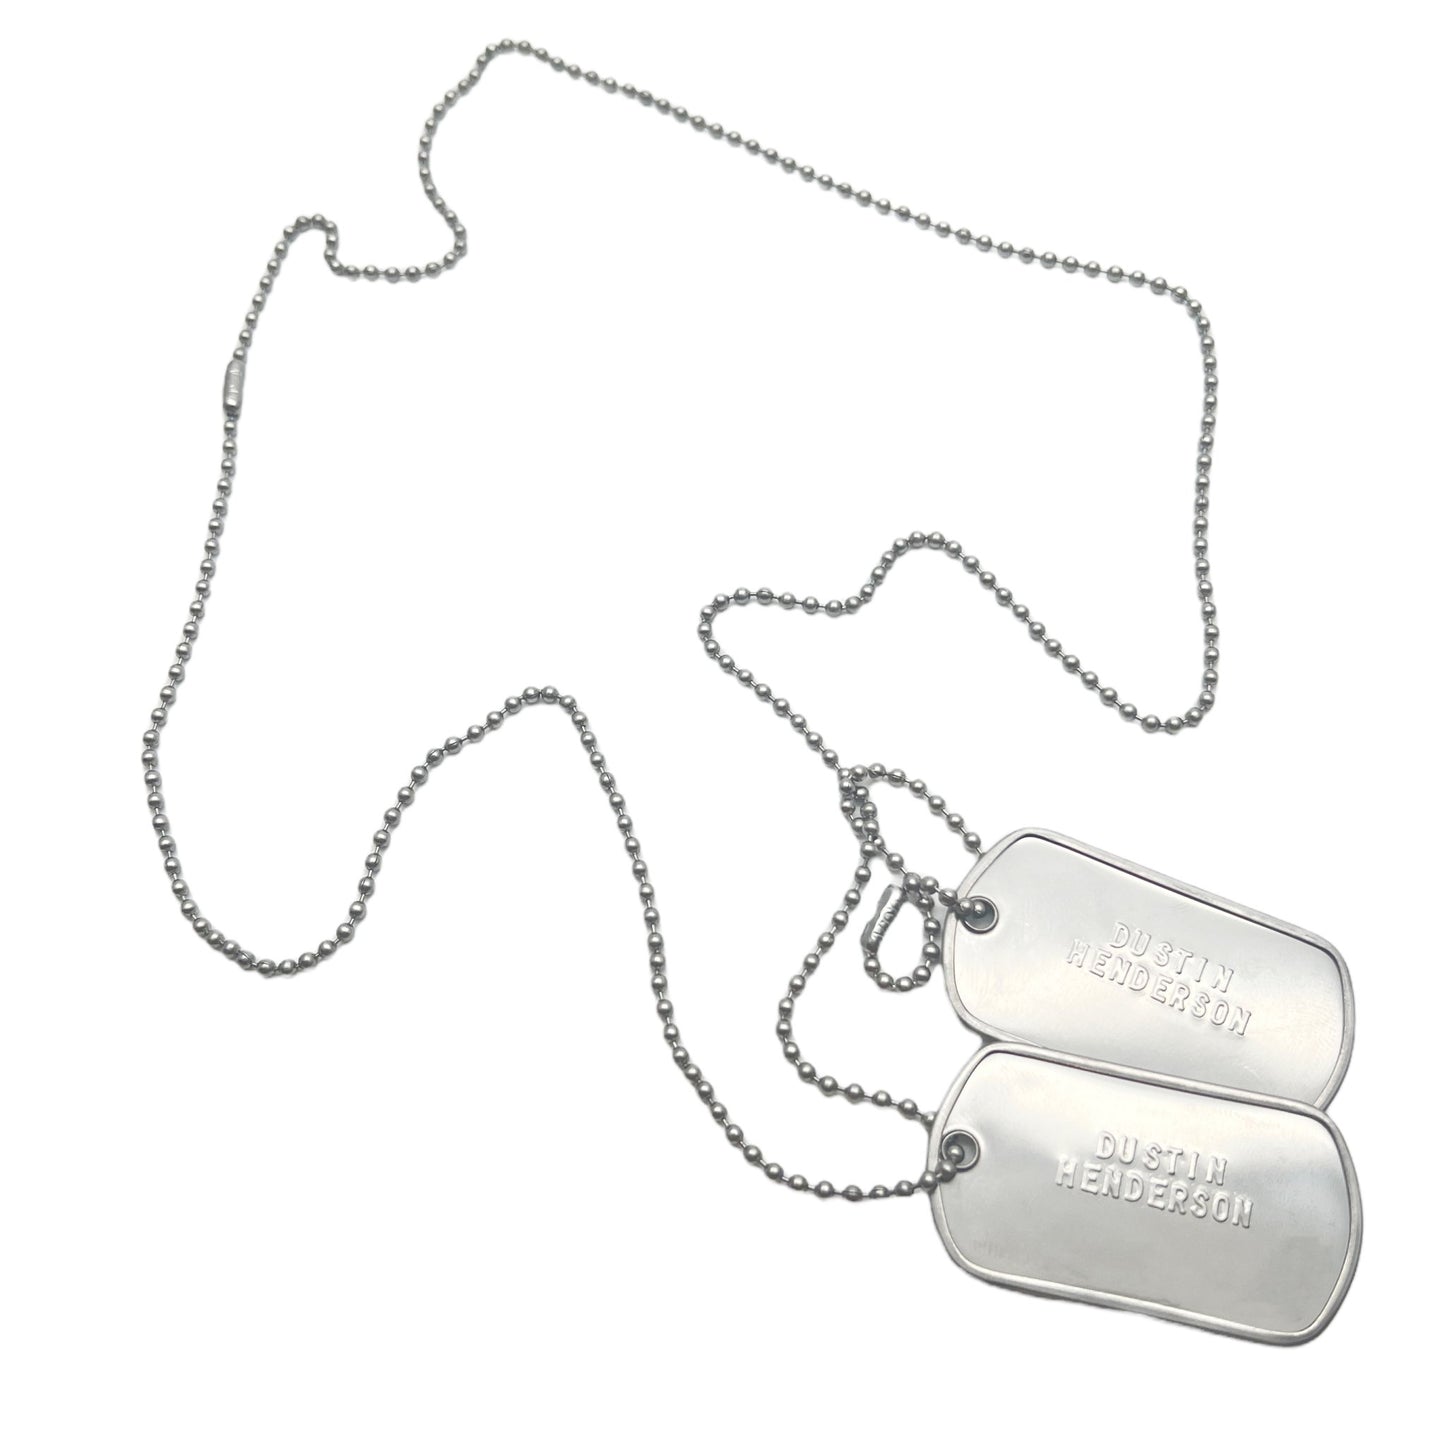 'DUSTIN HENDERSON' Dog Tags - Costume Cosplay Prop Replica Military - Stainless Steel Chains Included - TheDogTagCo